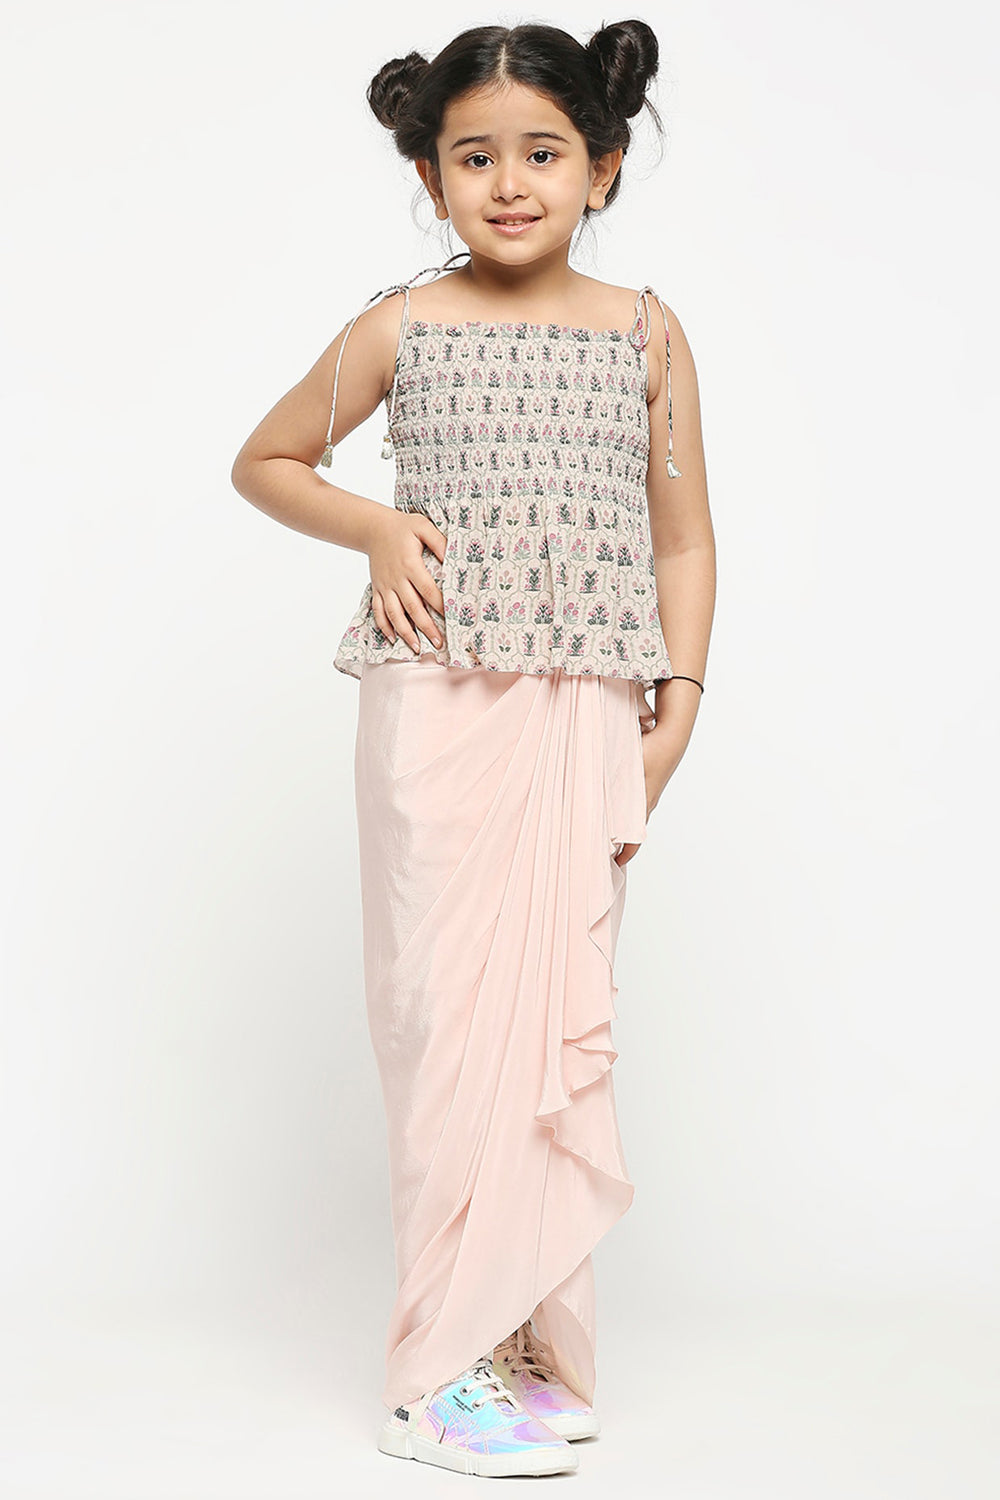 Mughal Floral Printed Crop Top With Shoulder Tie Up Paired With Draped Skirt